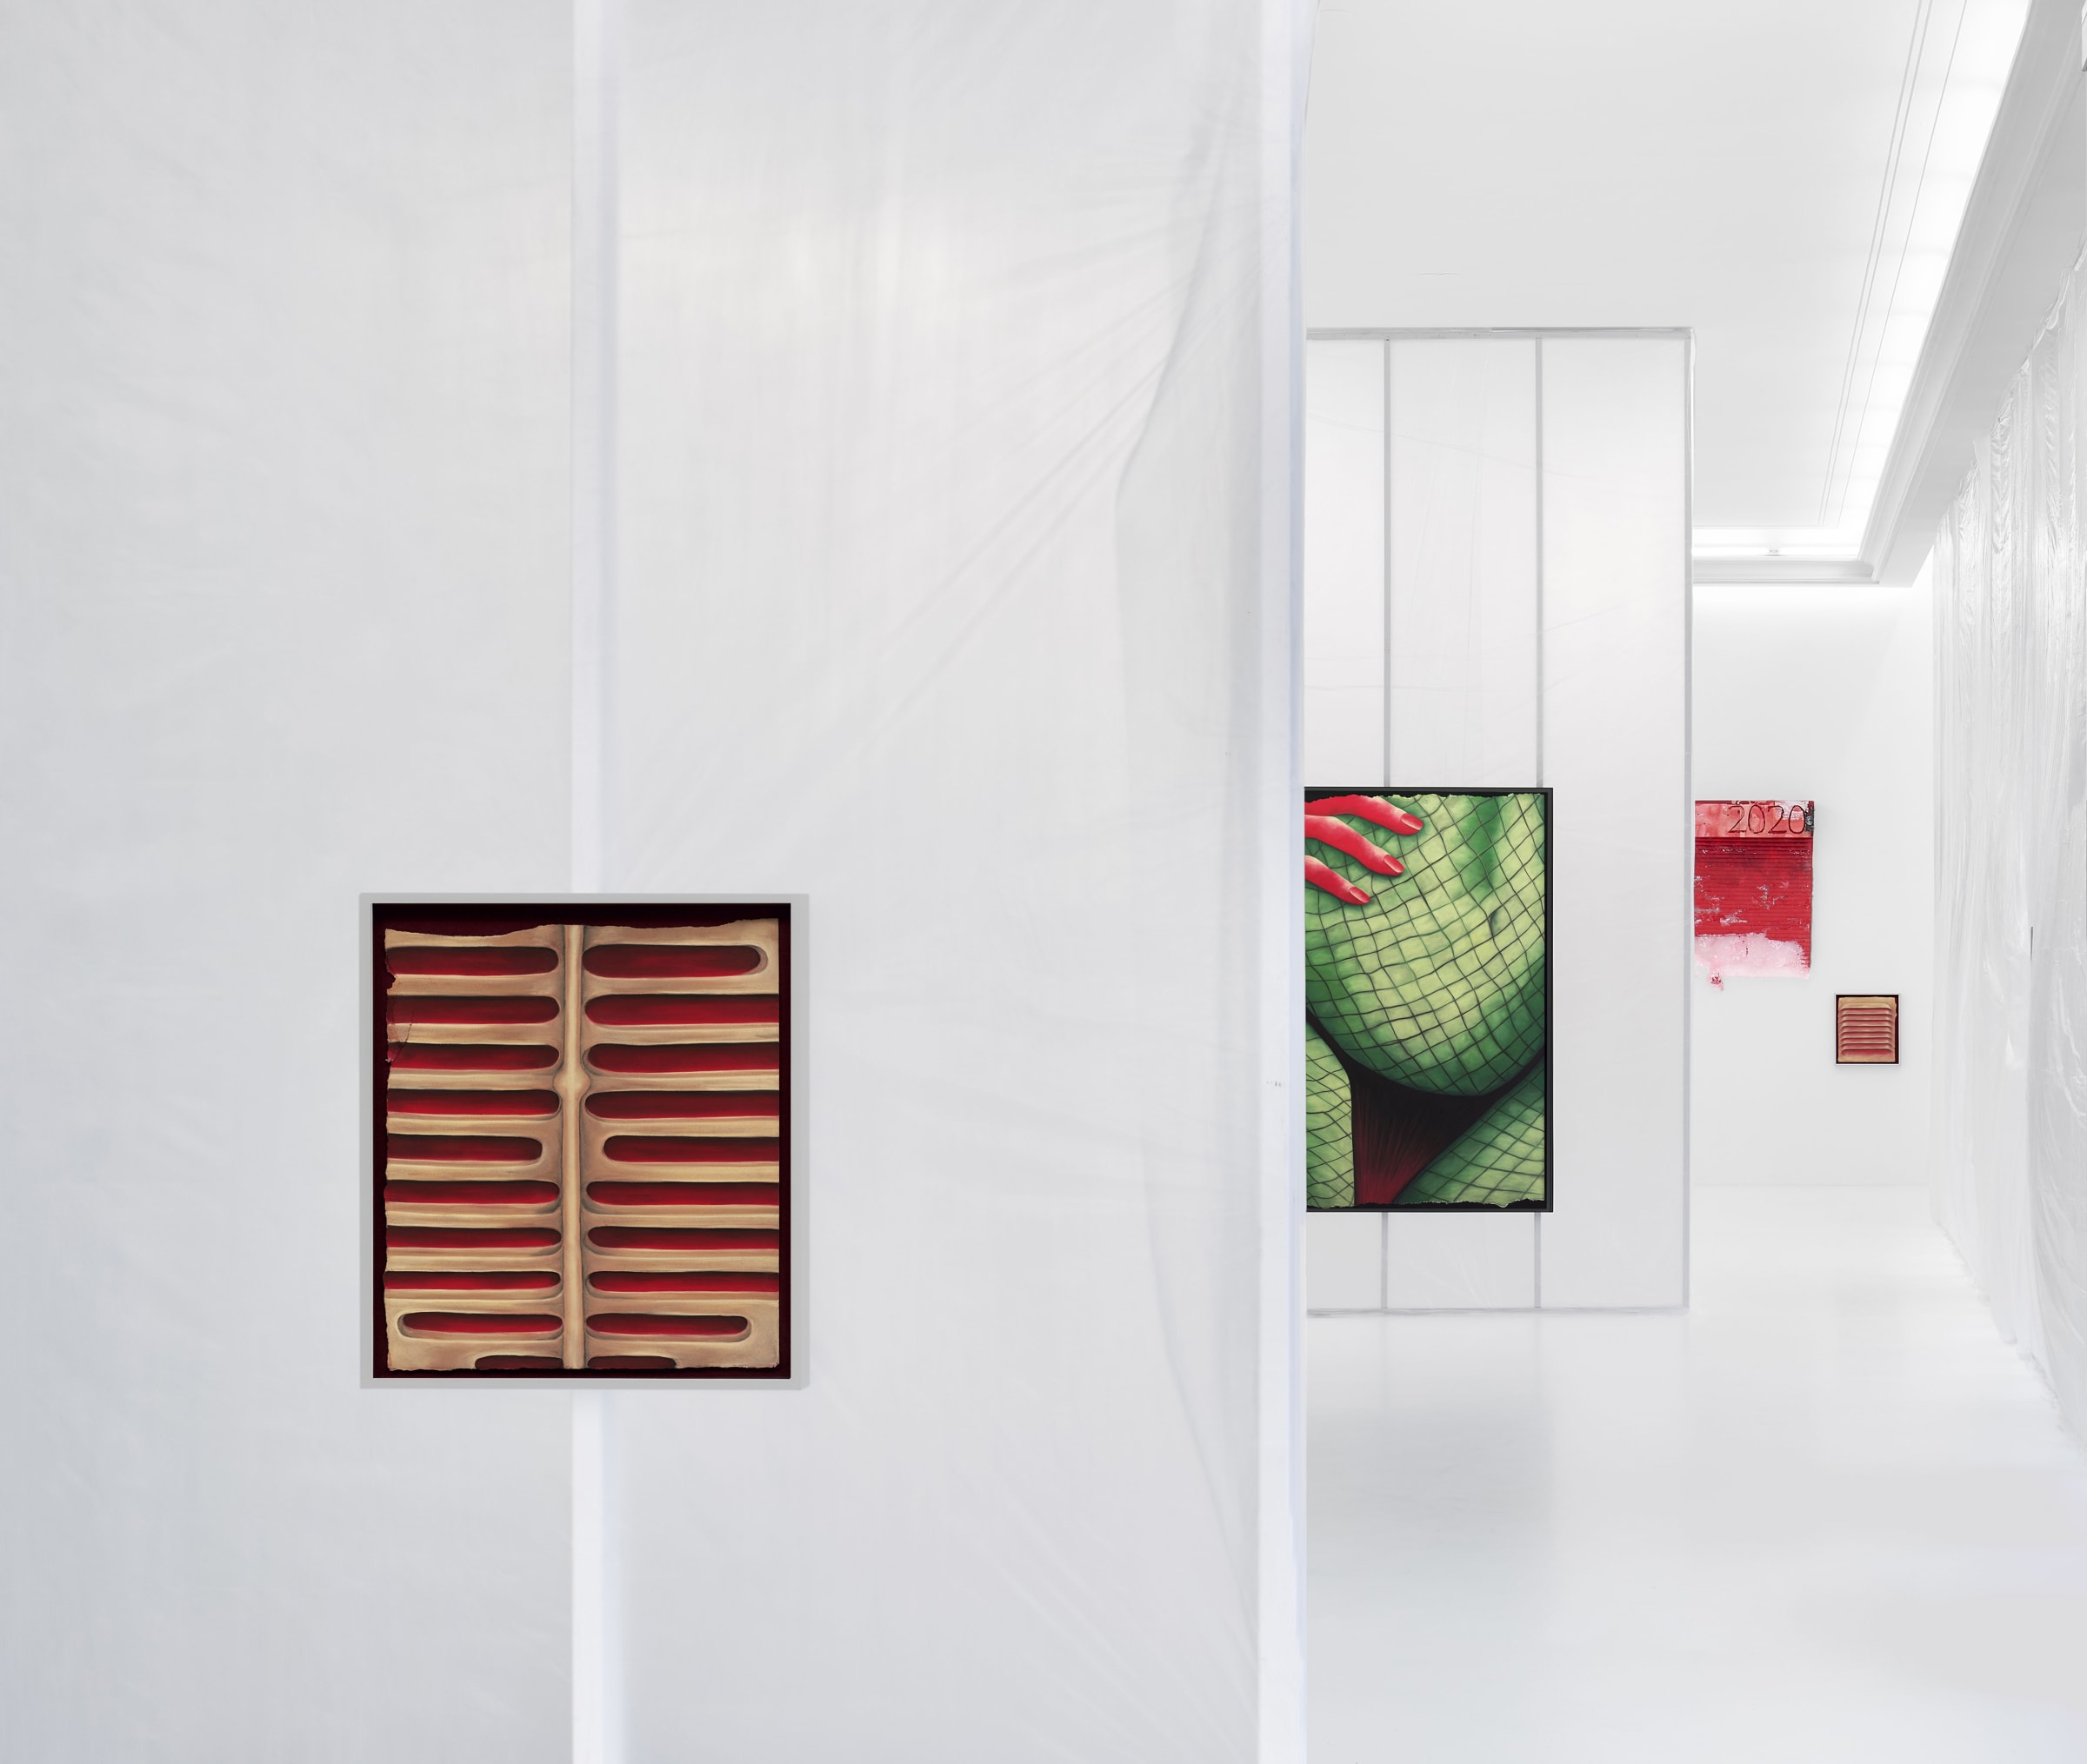 Rebecca Ackroyd 100mph Installation View January 22 – February 26, 2021 Peres Projects, Berlin Photographed by: Matthias Kolb